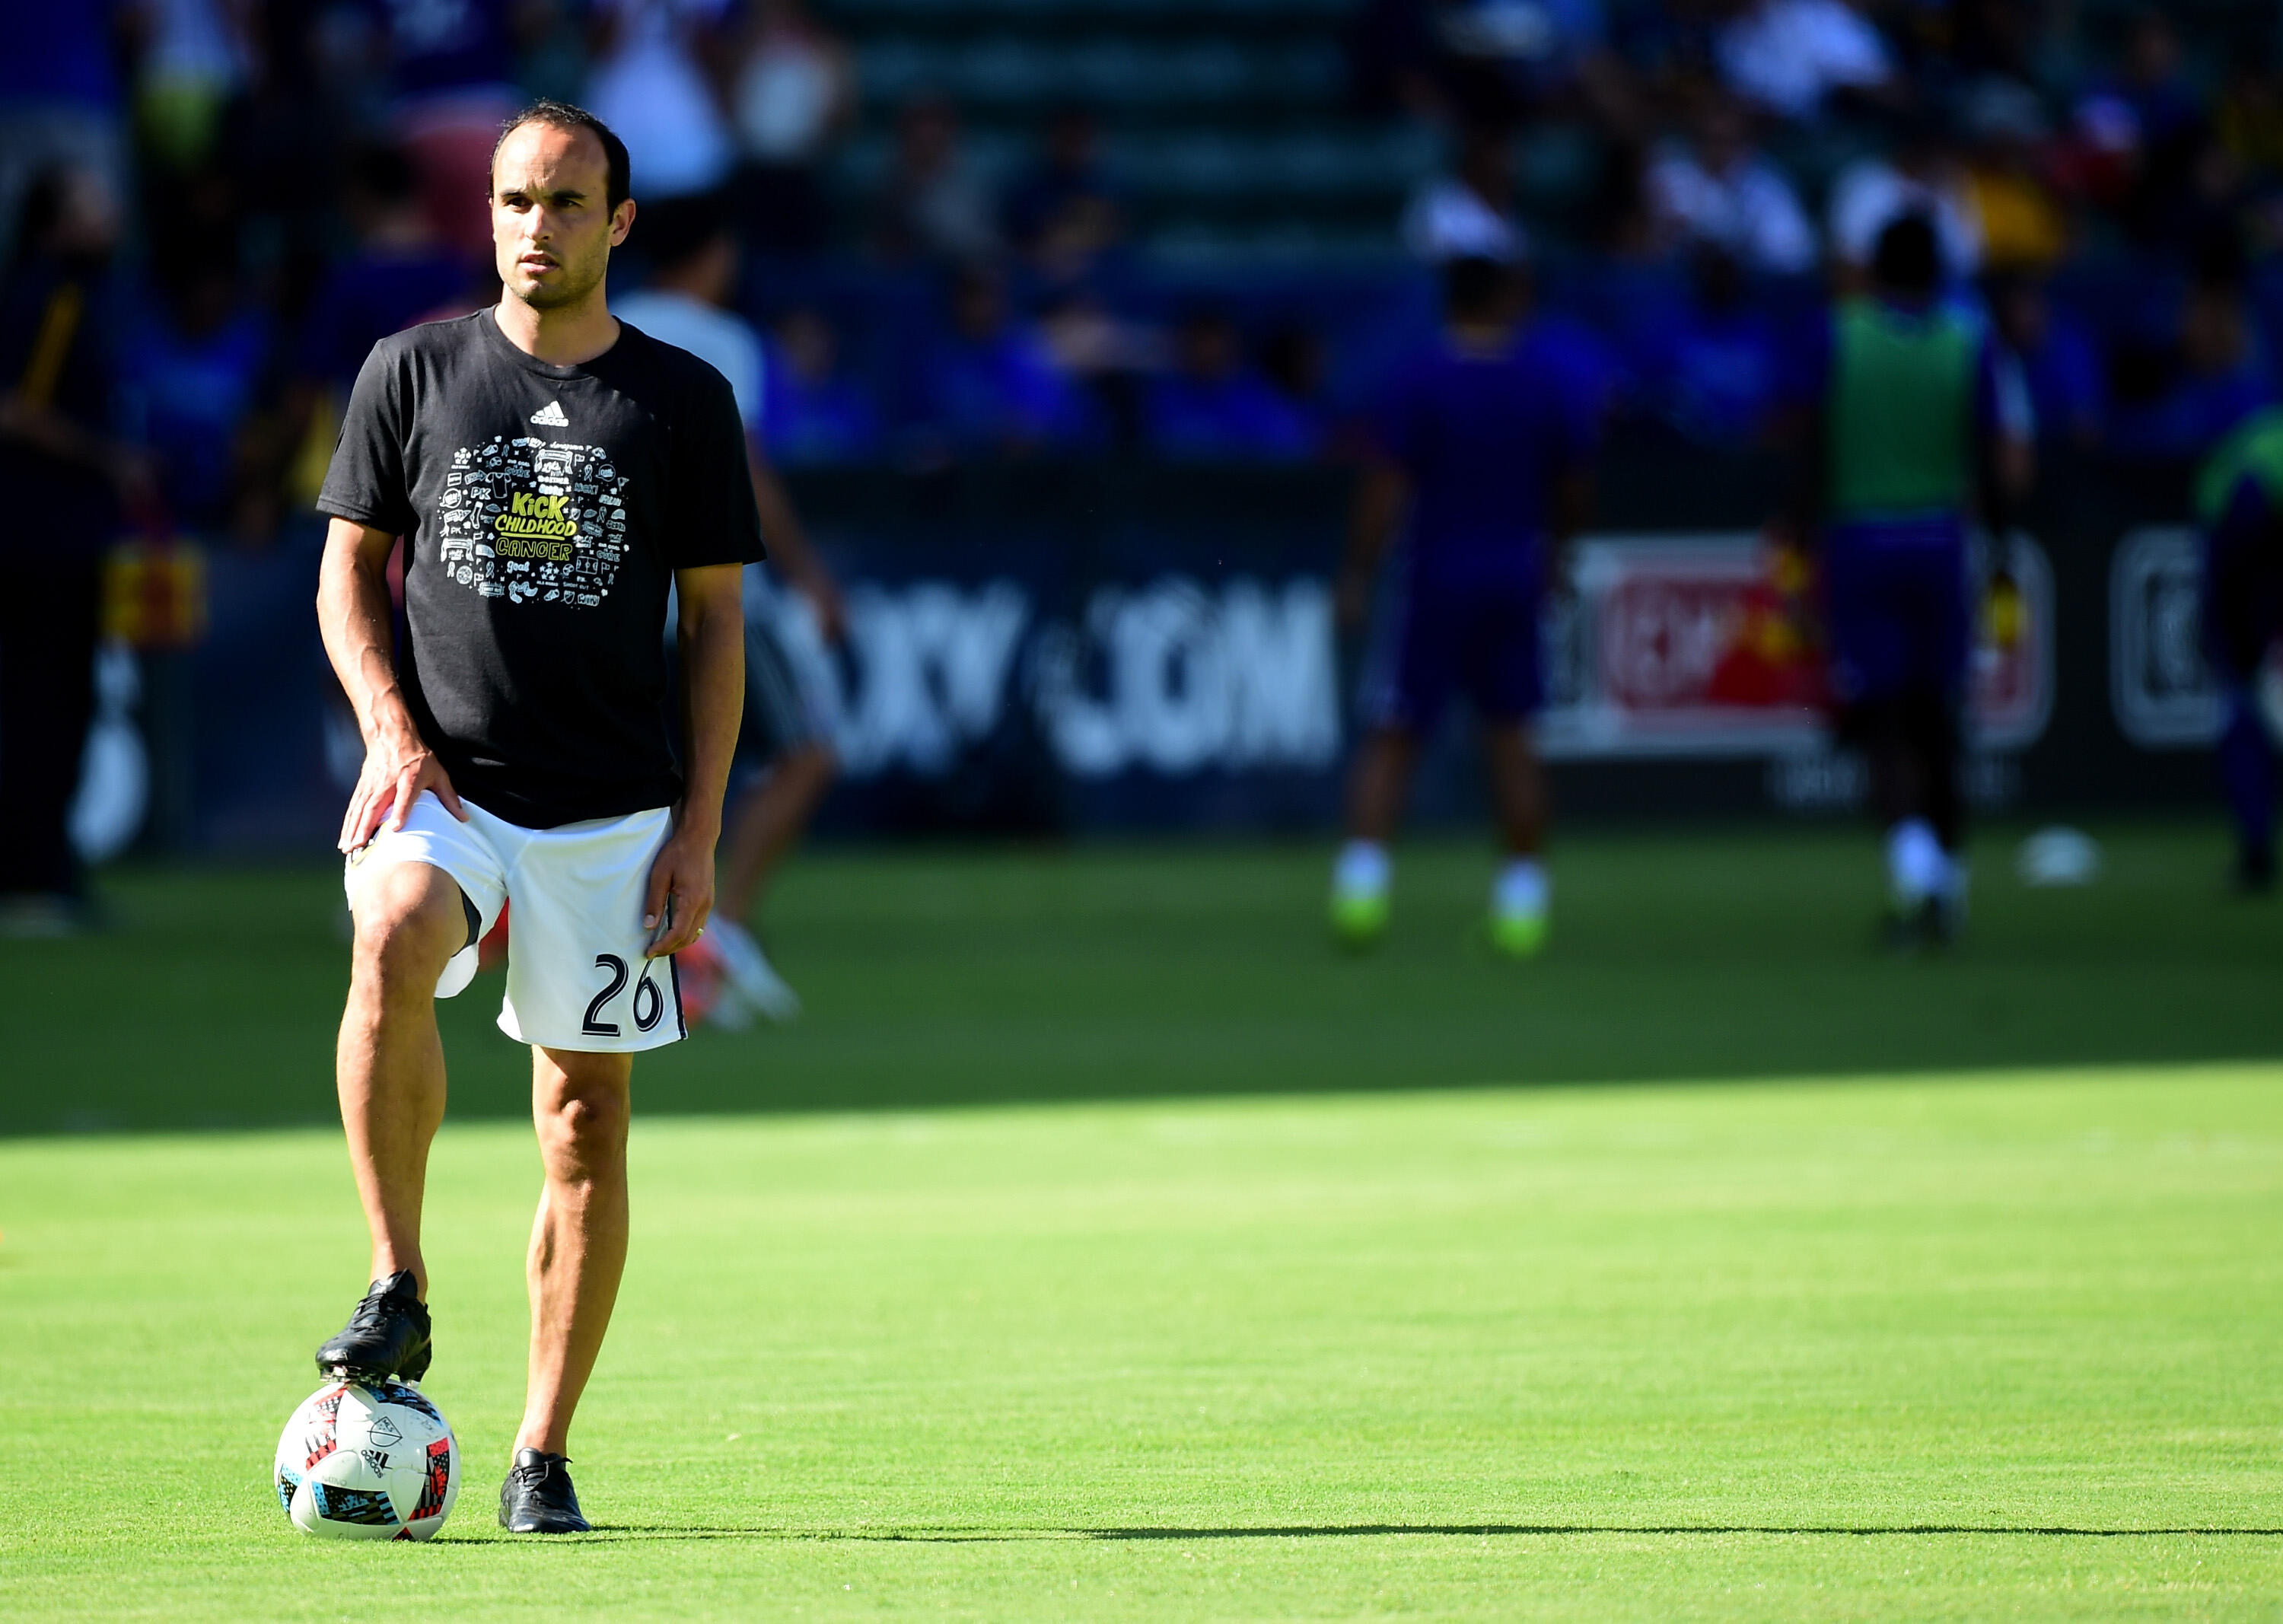 Landon Donovan On The U.S Soccer Culture And His New Team: The Sockers iHea...